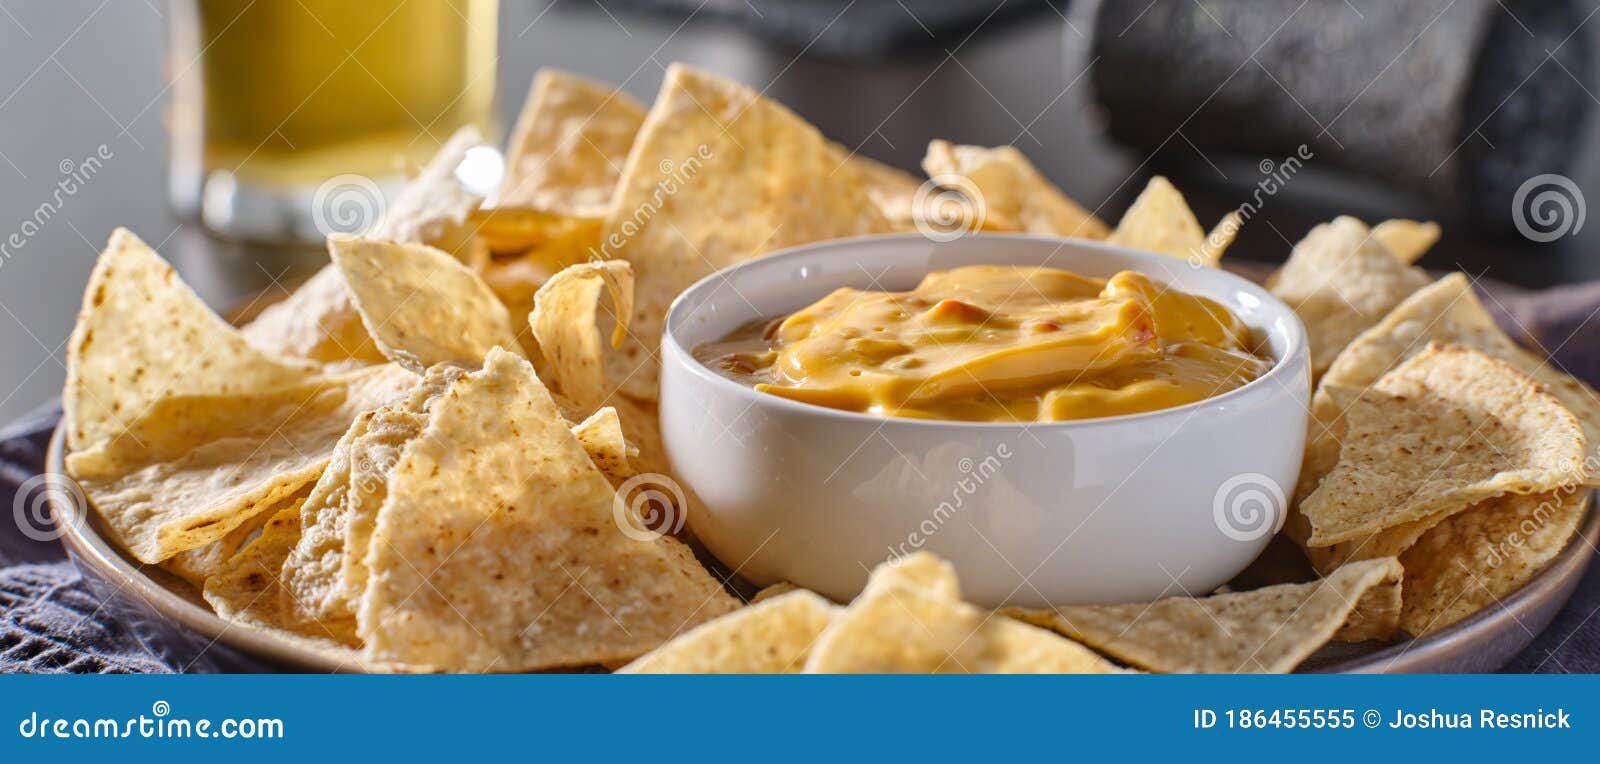 mexican hot queso cheese dip with corn tortilla chips on plate